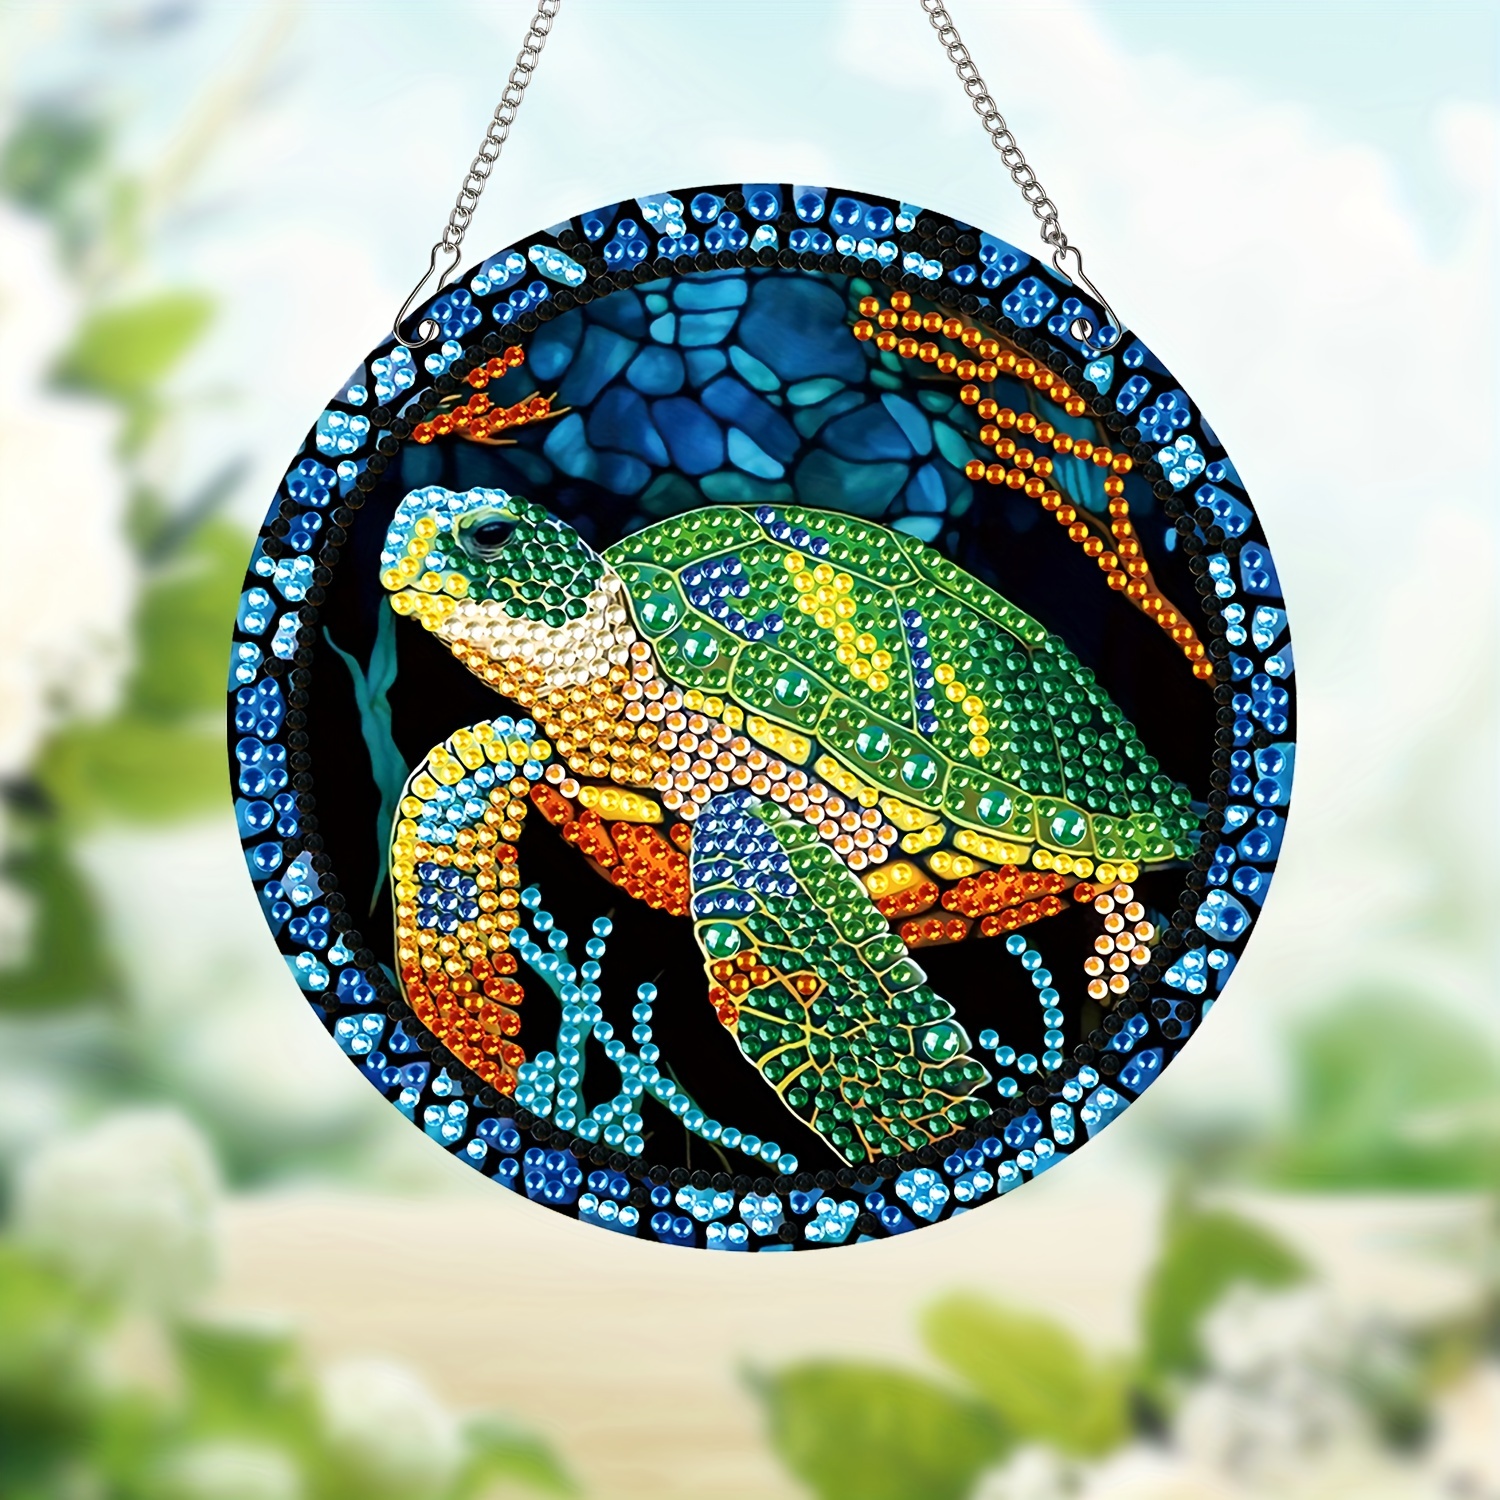 DIY 5D Diamond Painting Sea Turtle Kit , Diamond Painting for by Number Kits for Adults Full Drill Turtle Art for Home Wall Decor